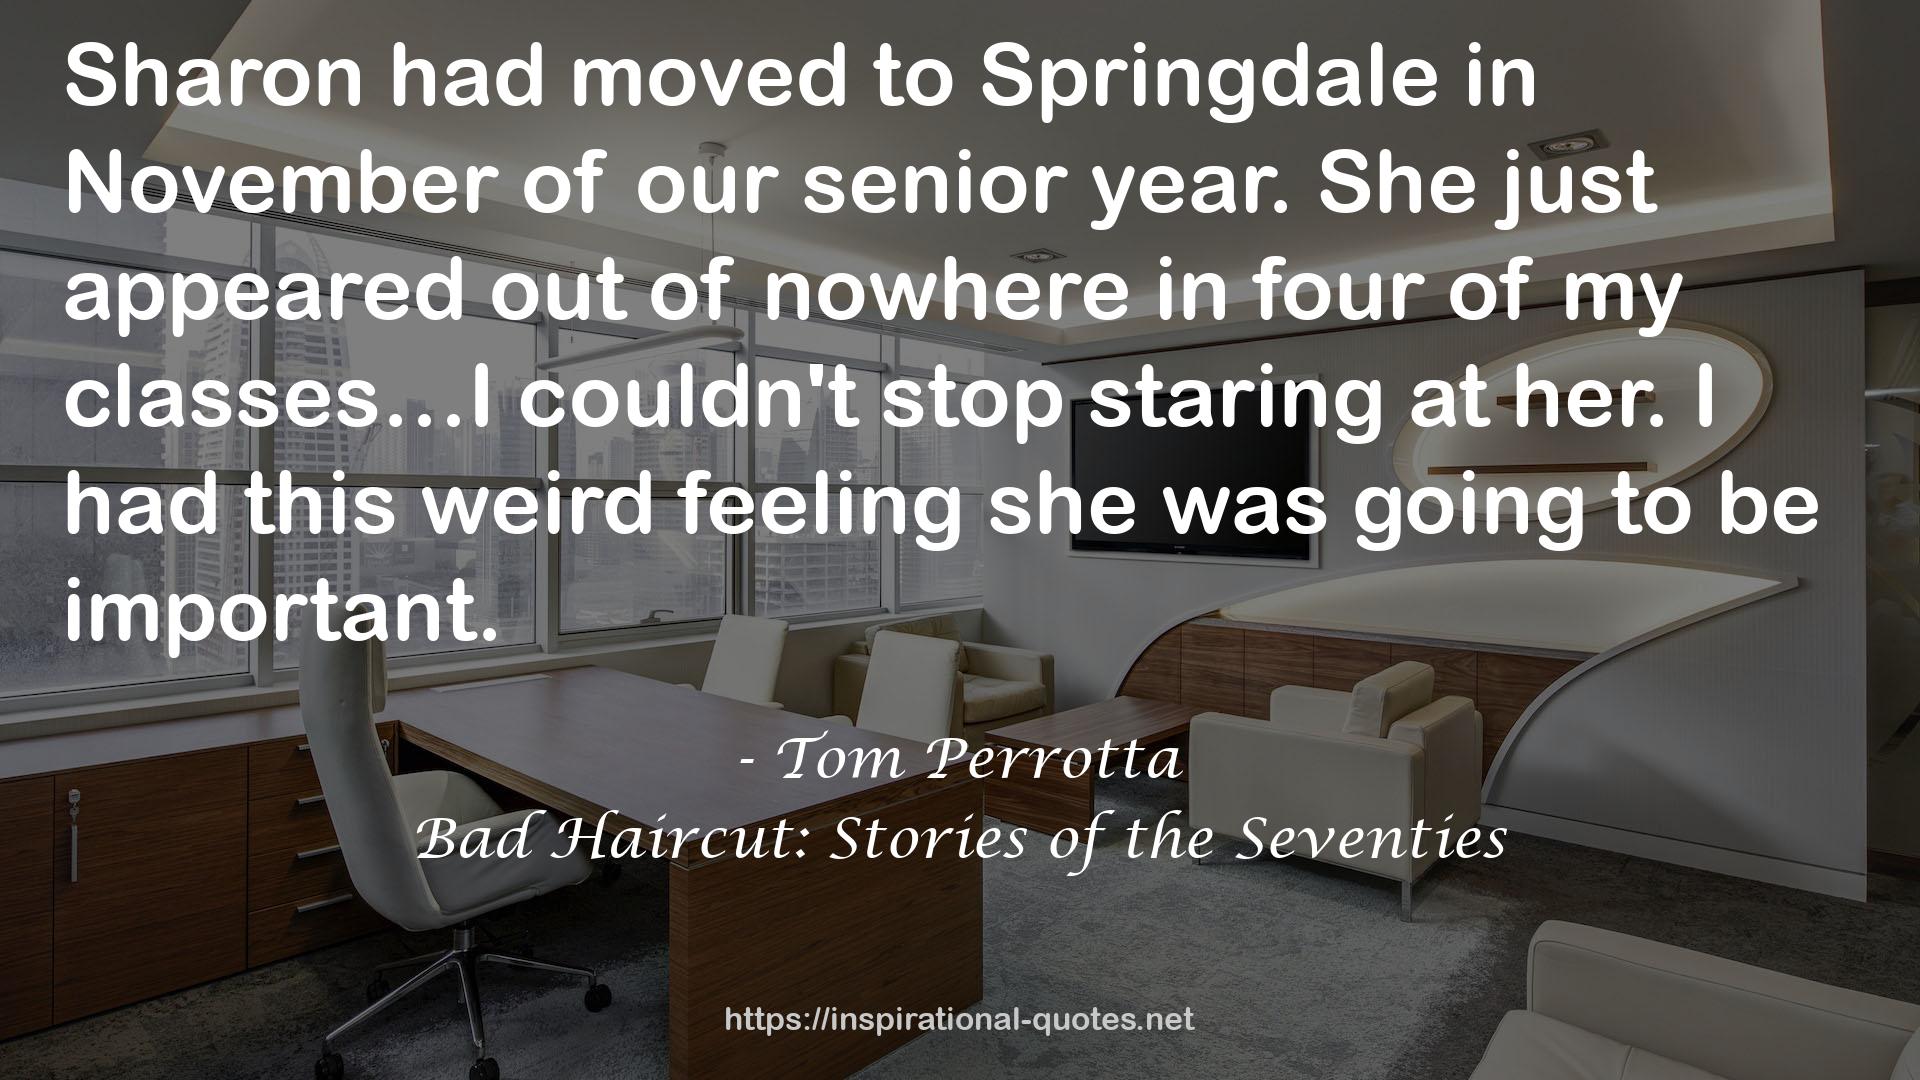 Bad Haircut: Stories of the Seventies QUOTES